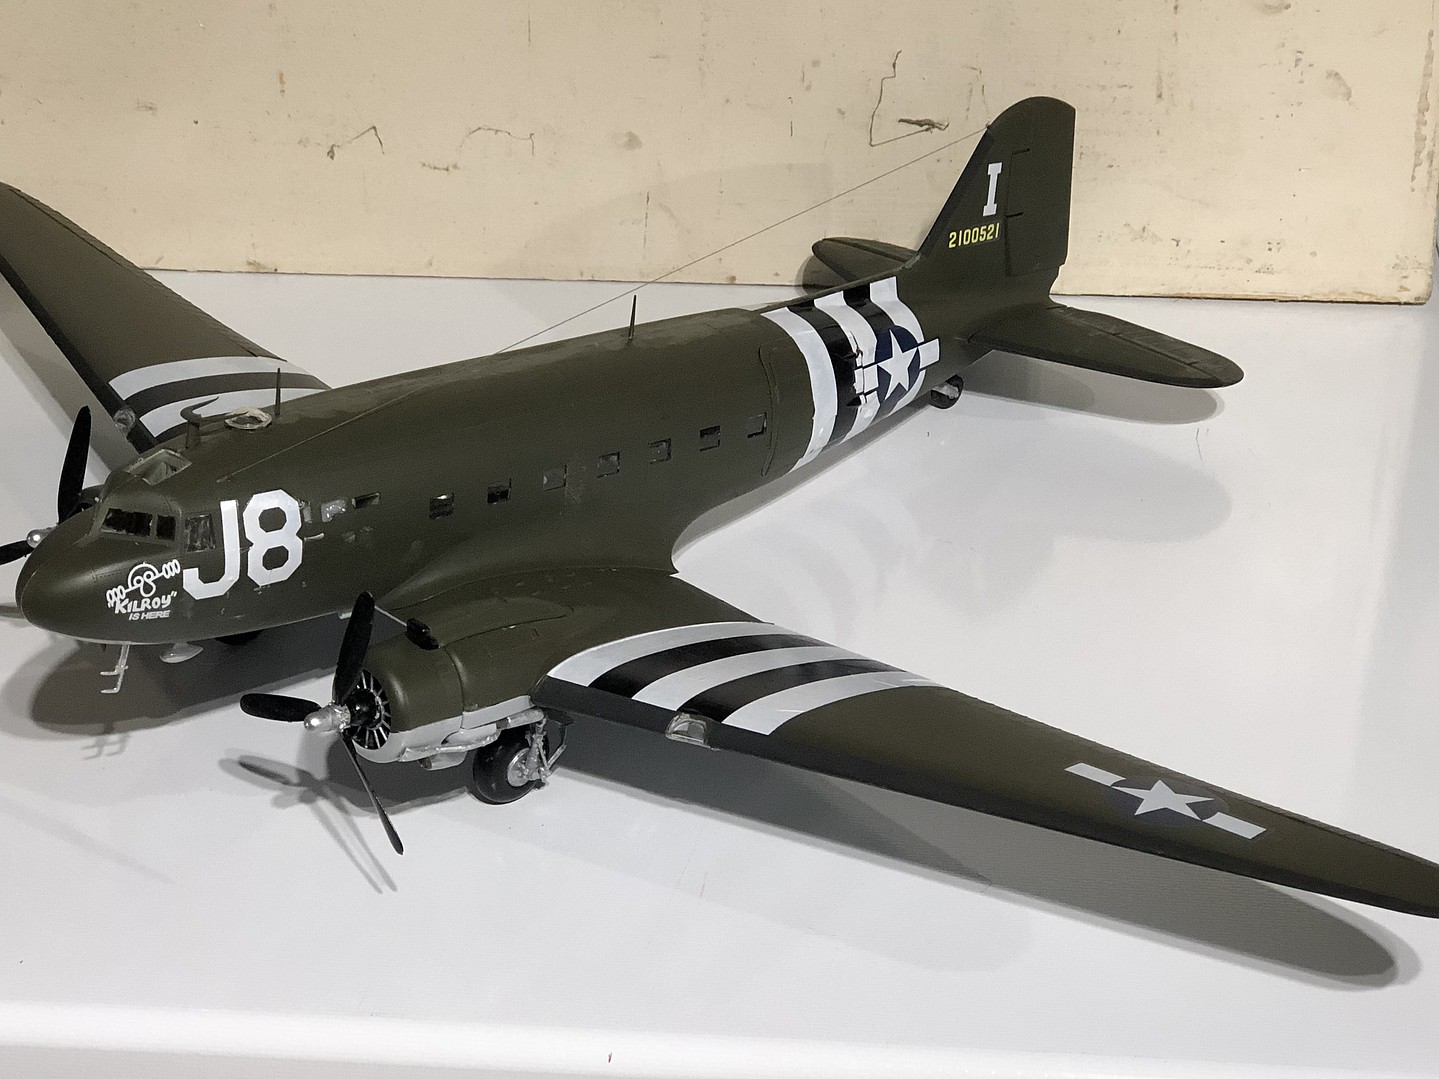 Trumpeter C-47A Skytrain Military Transport Aircraft Plastic Model 